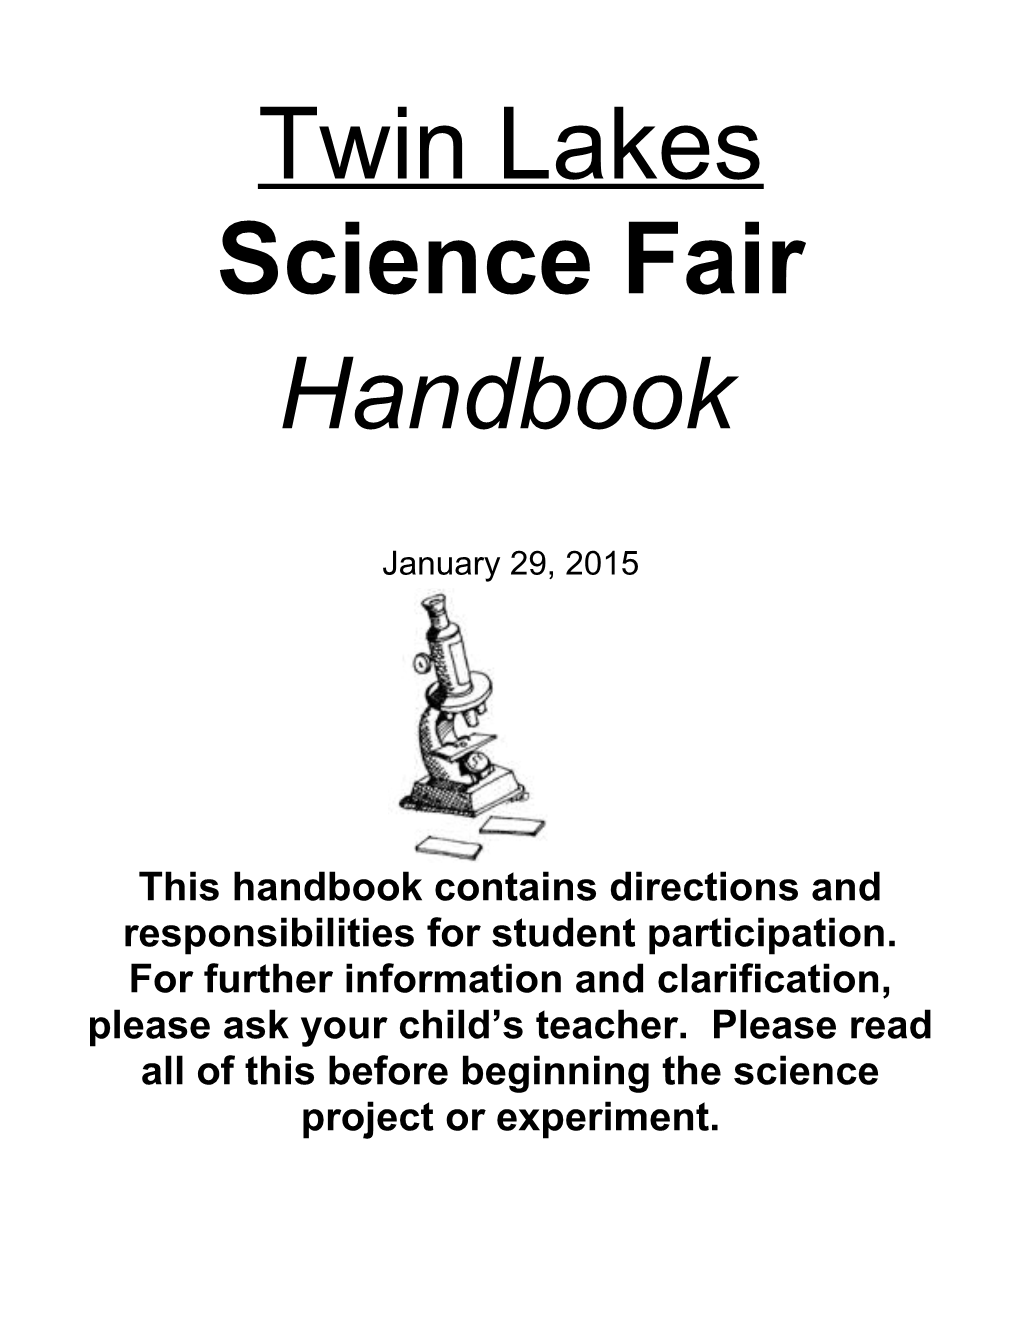 Student Reponssibilities For The Science Fair